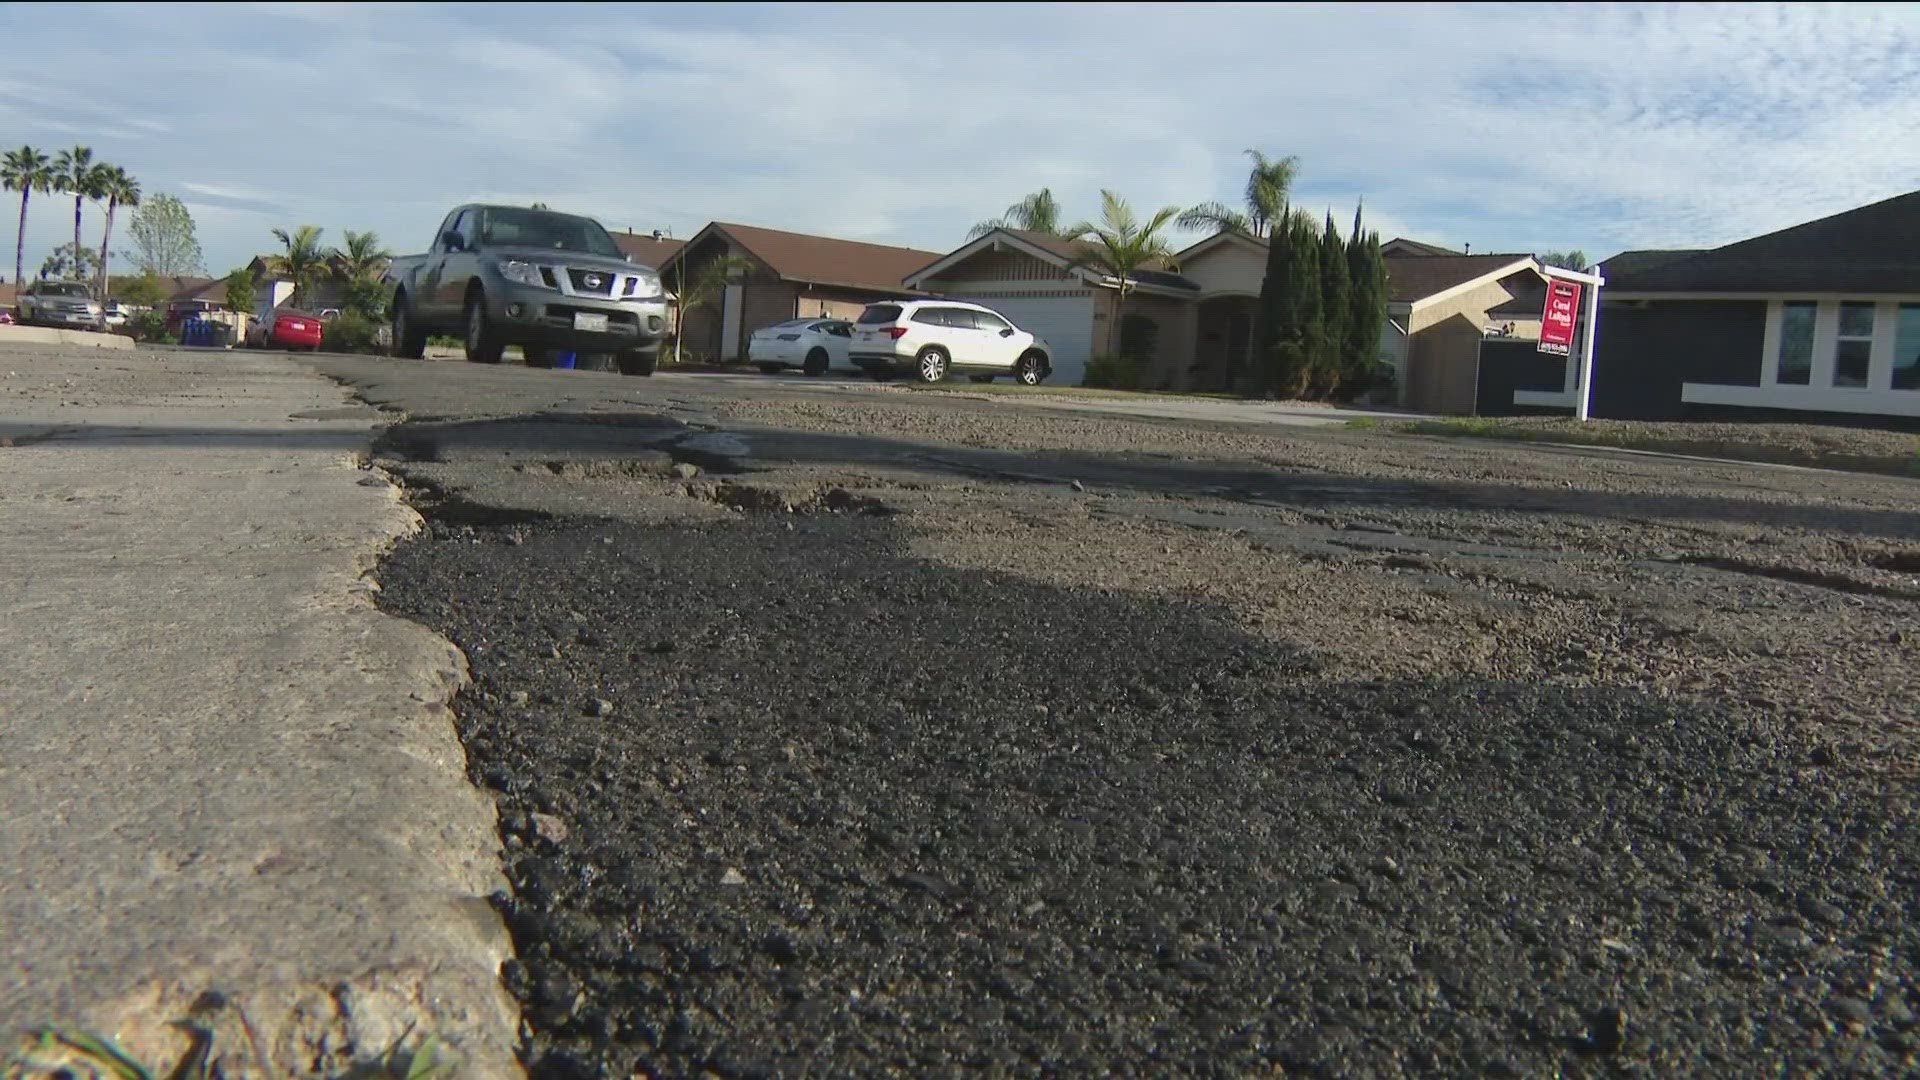 A new pavement condition report shows San Diego's overall score for roads has dropped from satisfactory to poor, with several roads less than a 10 out of 100.